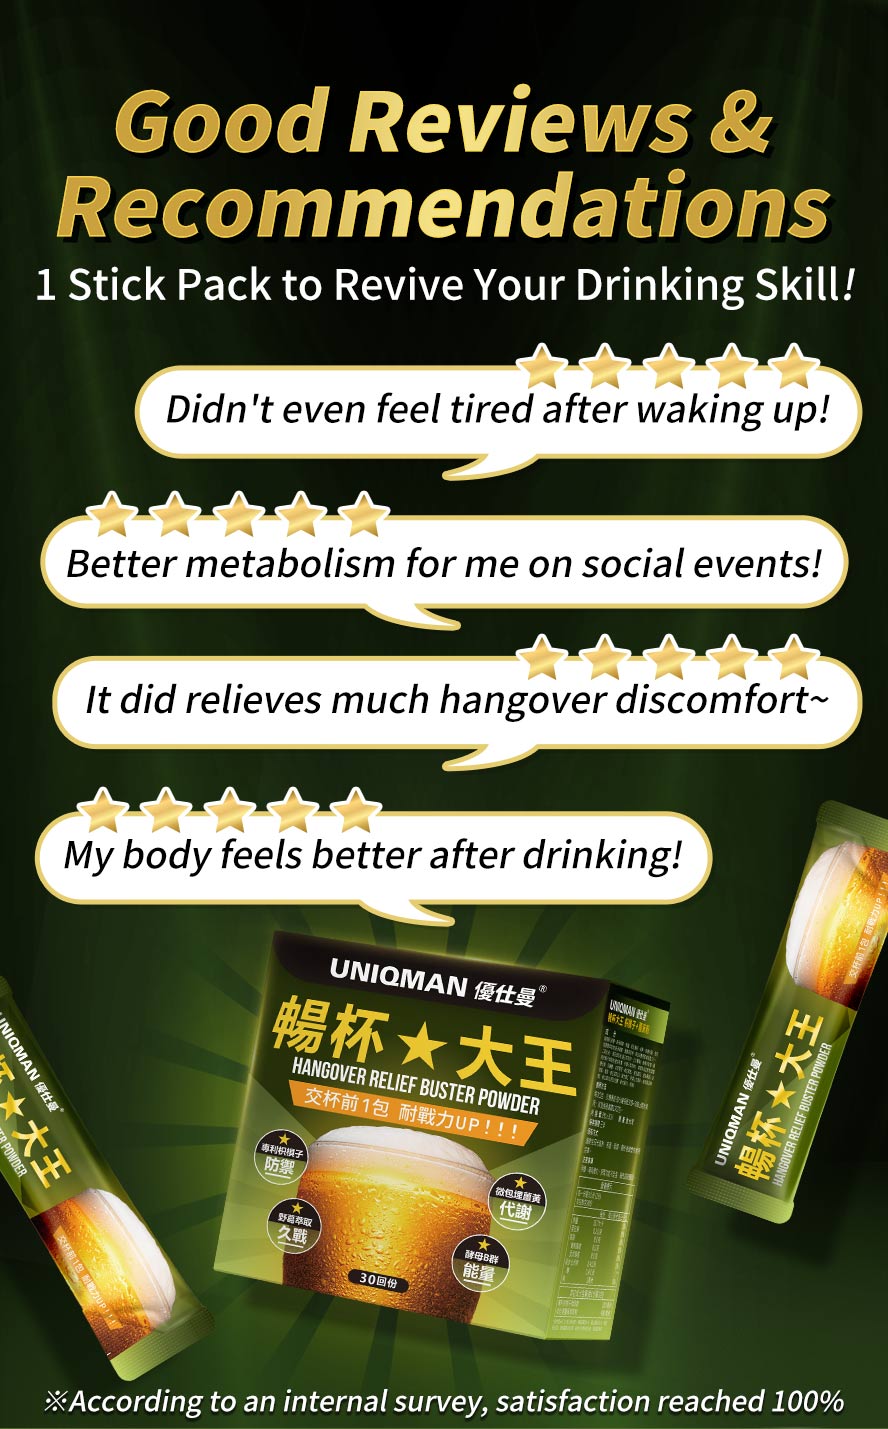 UNIQMAN Hangover Relief Buster has good reviews and recommendatios by customer